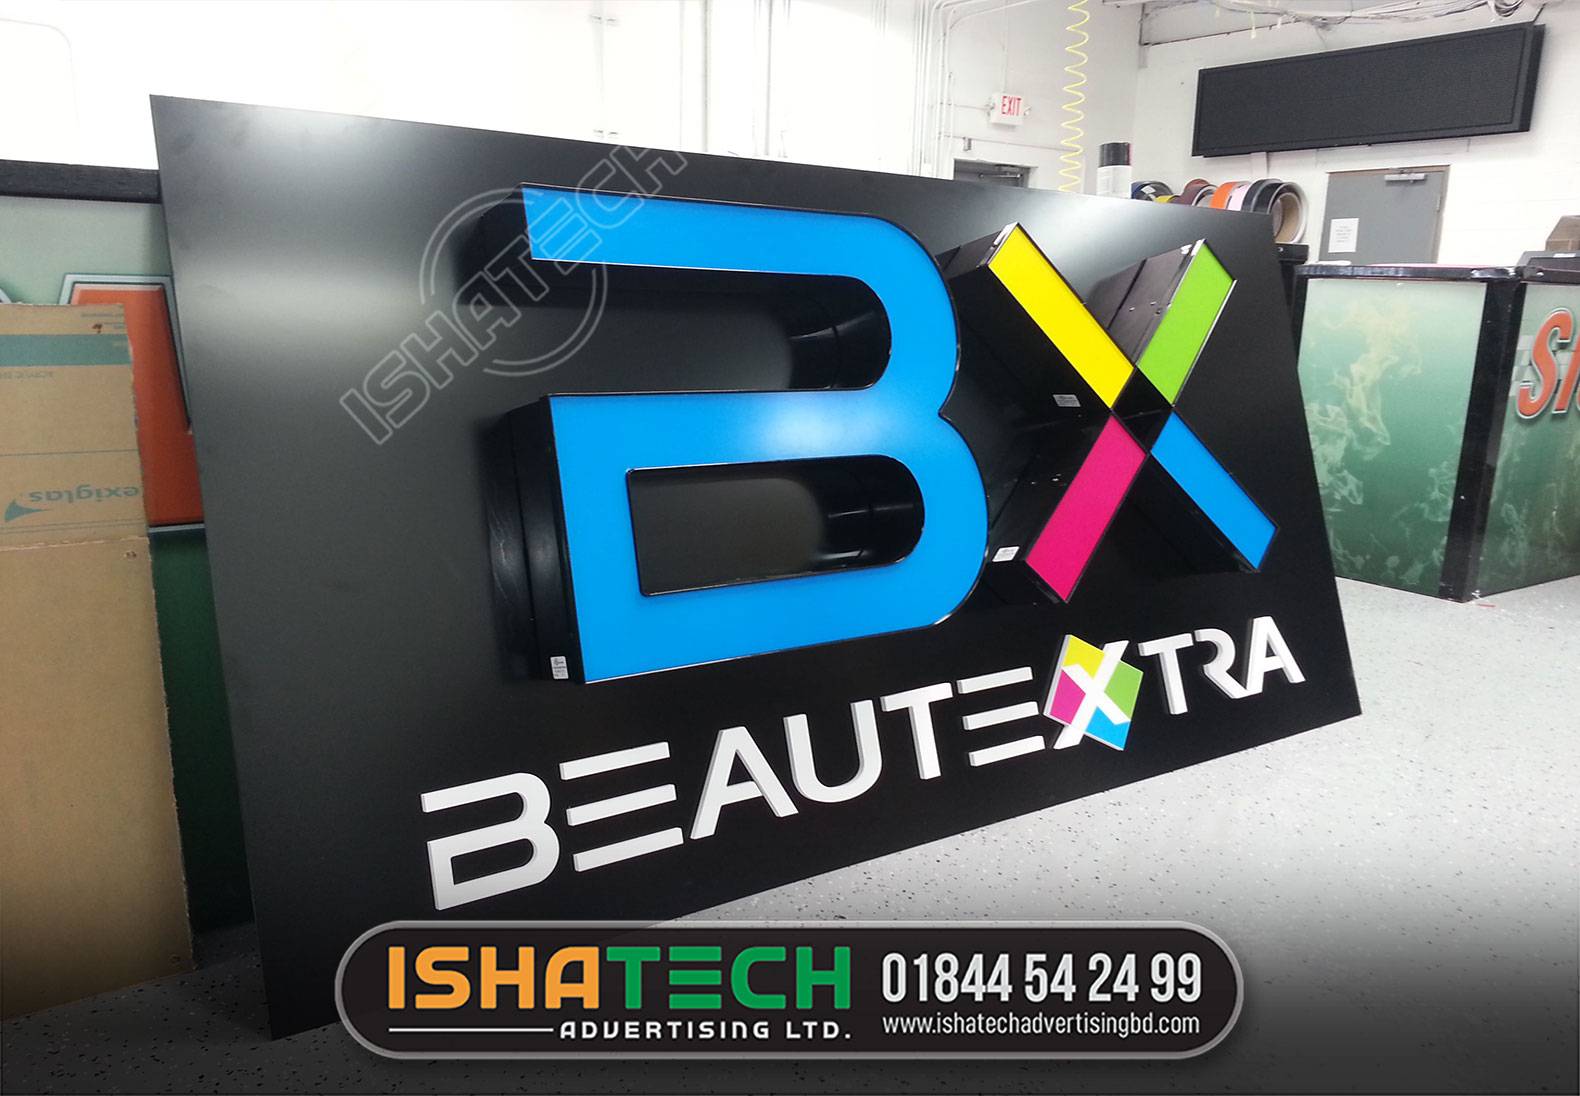 BX BEAUTEXTRA ACRYLIC NAMEPLATE MAKING | ACRYLIC LETTER ROUND SIDE SS SIGNAGE AND BACKGROUND GLASS NAMEPLATE MAKING BY ISHATECH ADVERTISING LTD